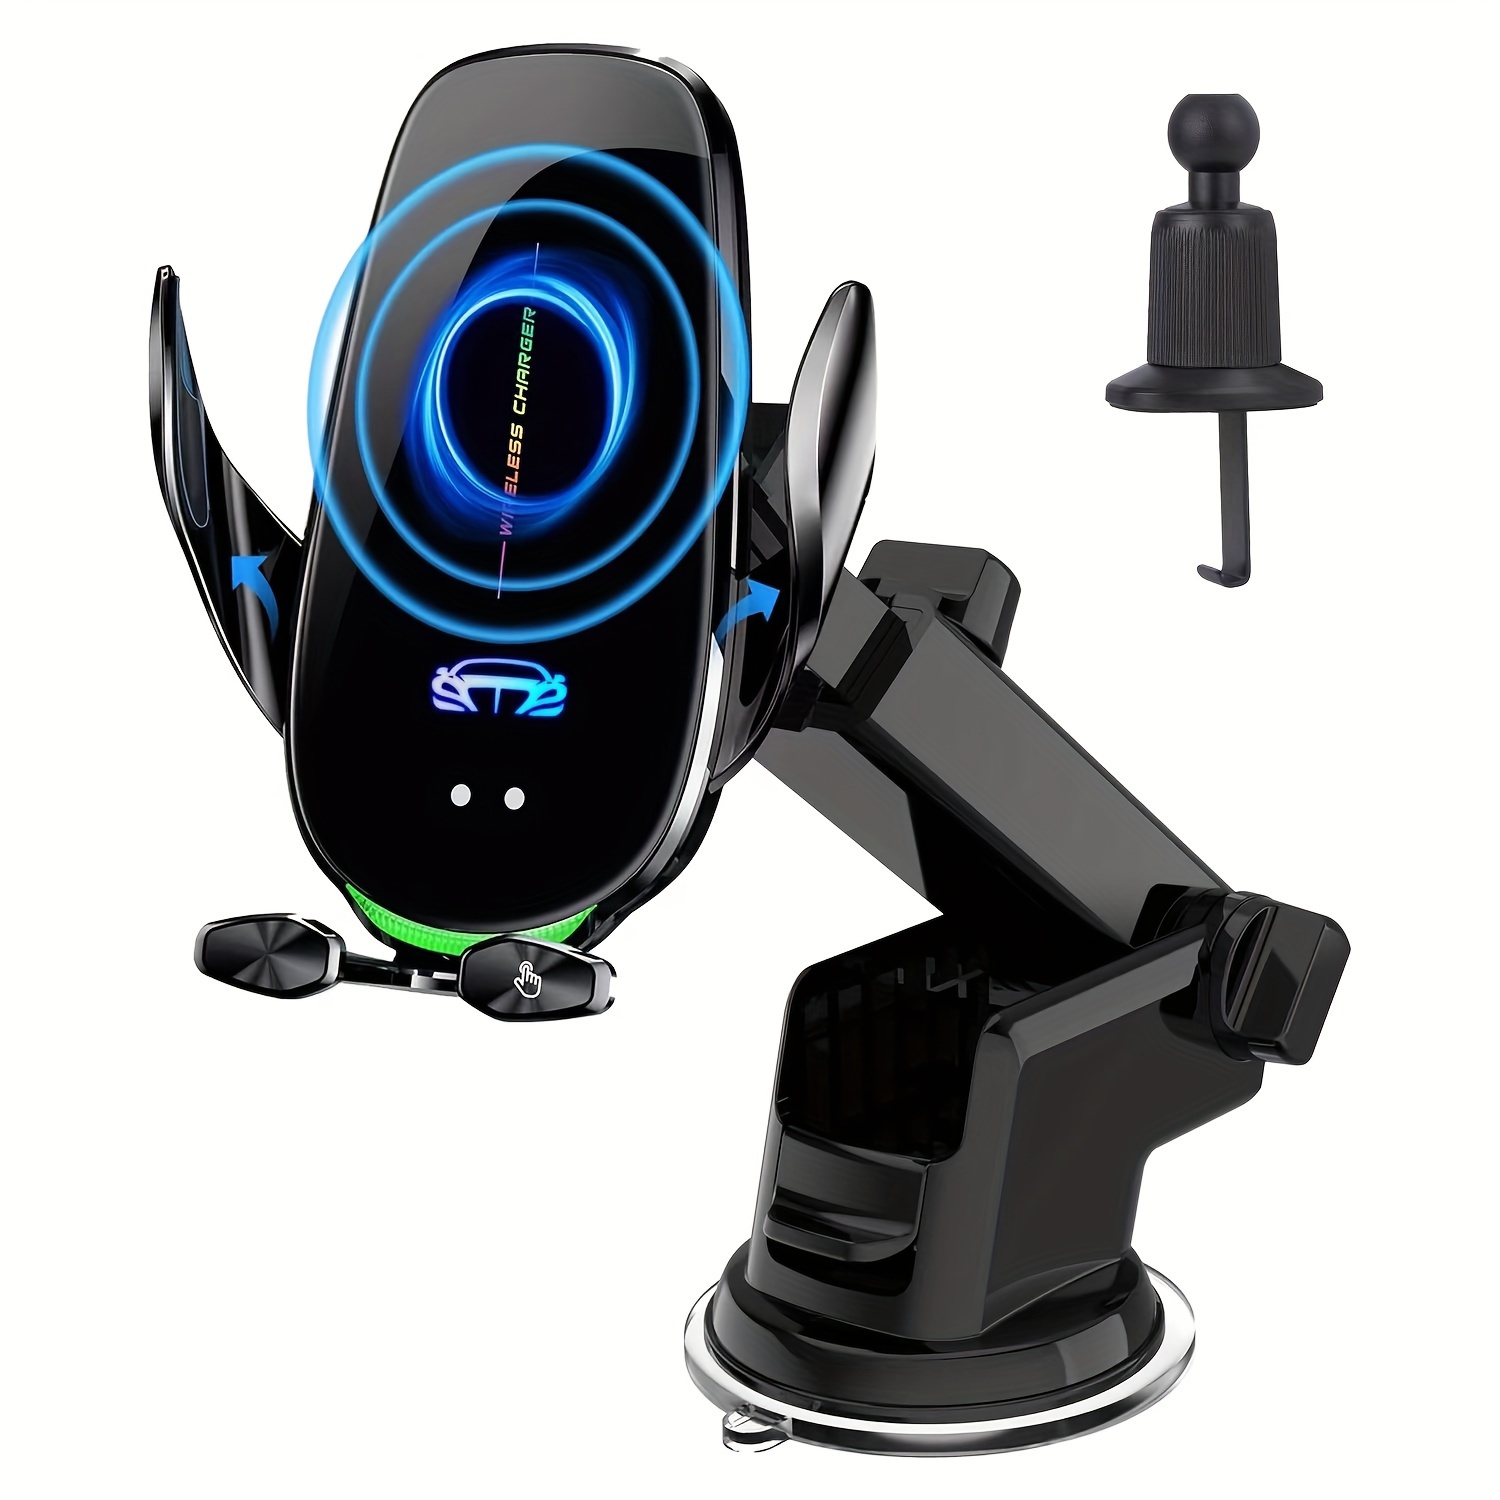 Hoey 3 in 1 Wireless Car Charger, 15W Smart Sensor Auto Clamping